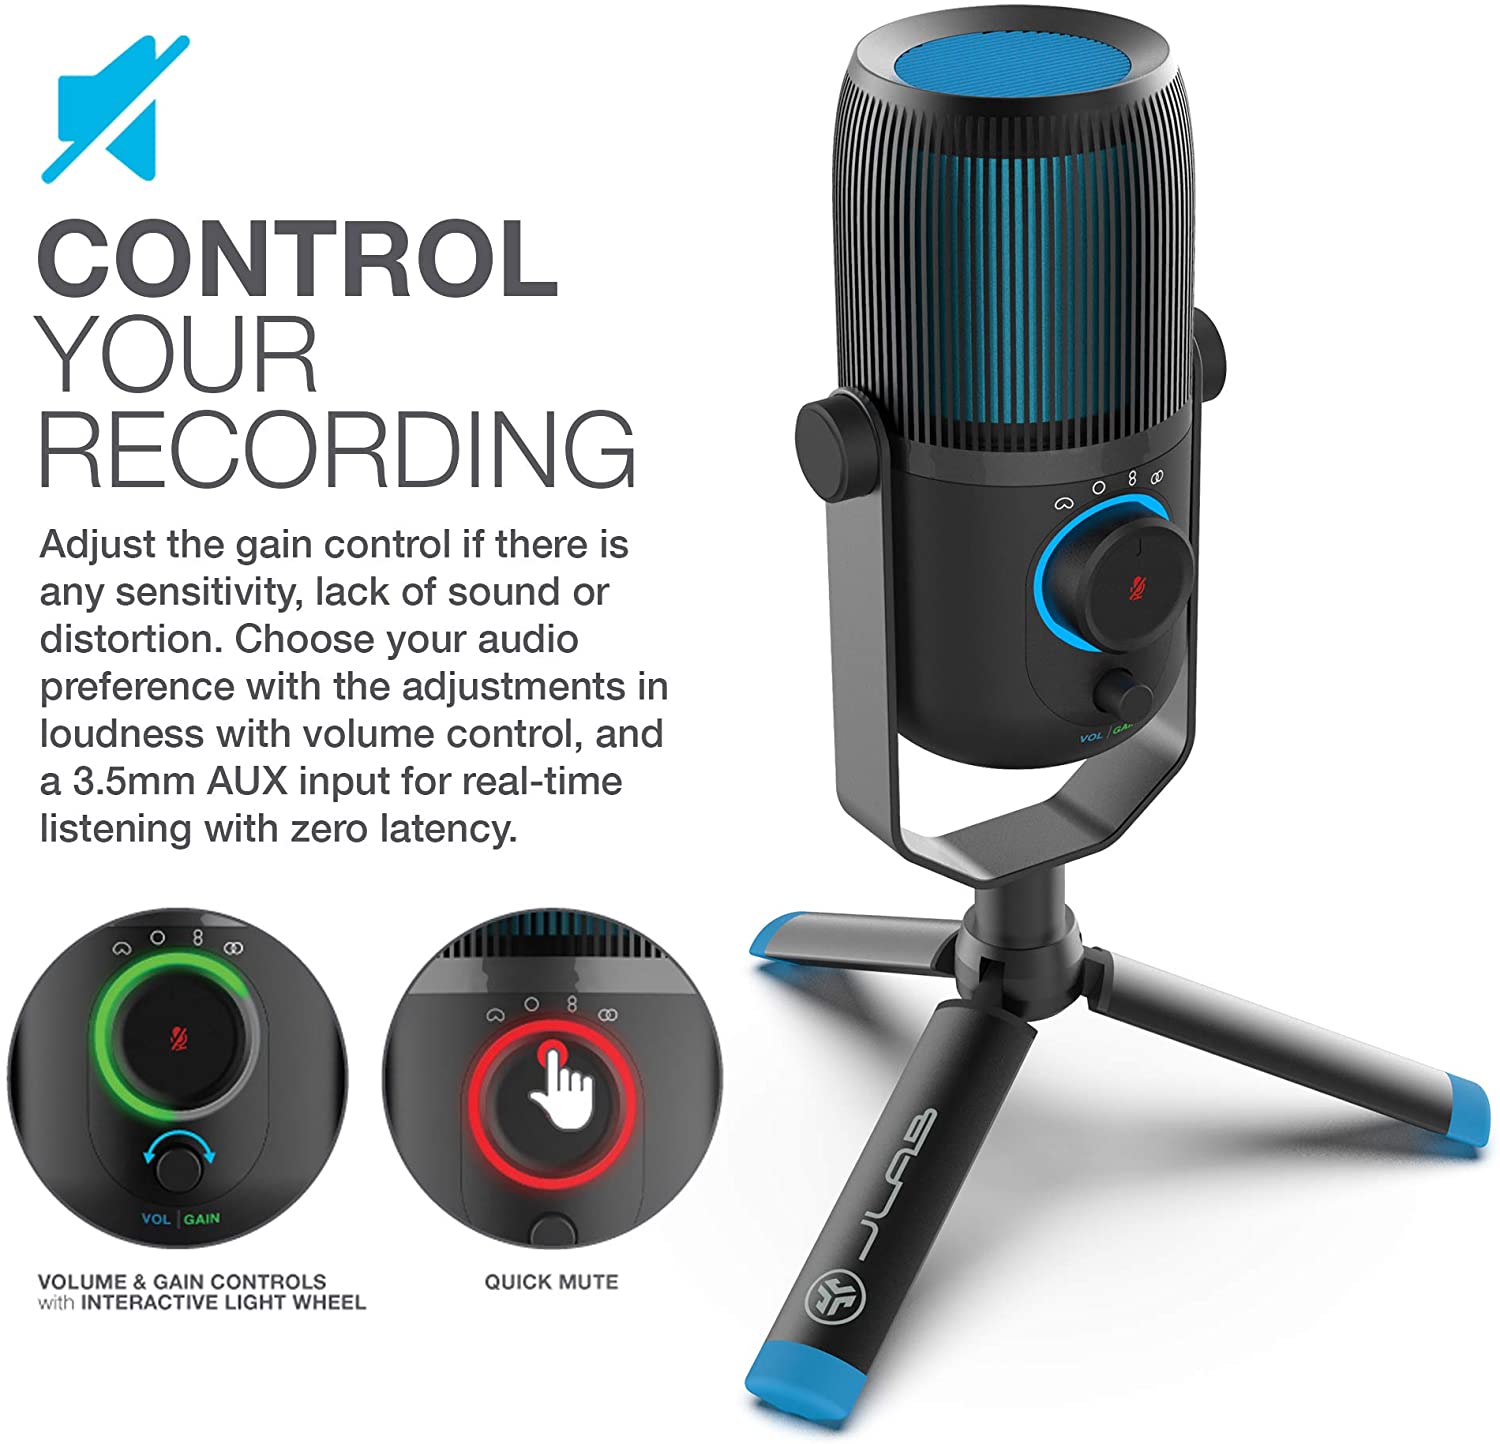 JLab Talk USB Microphone with Cardioid, Omnidirectional, Stereo or Bidirectional Modes - Pro-Distributing